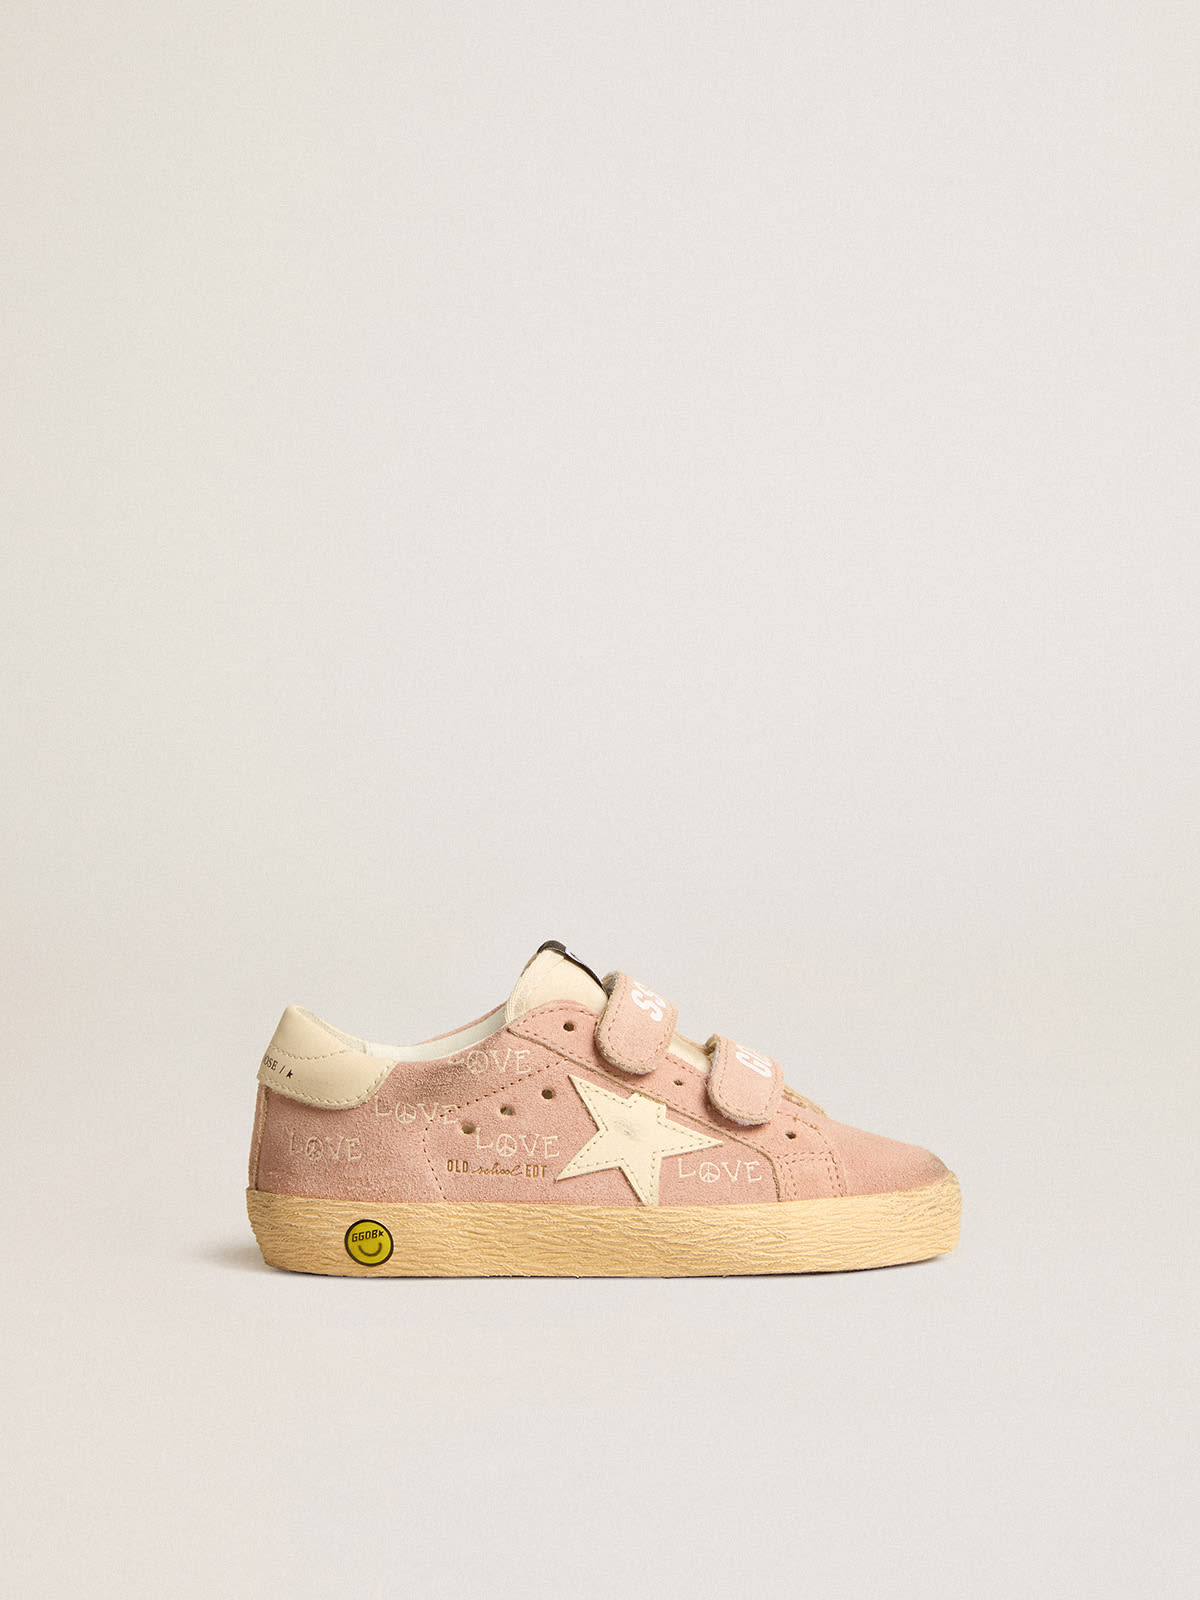 Old School Junior in pink suede with cream leather star and heel tab